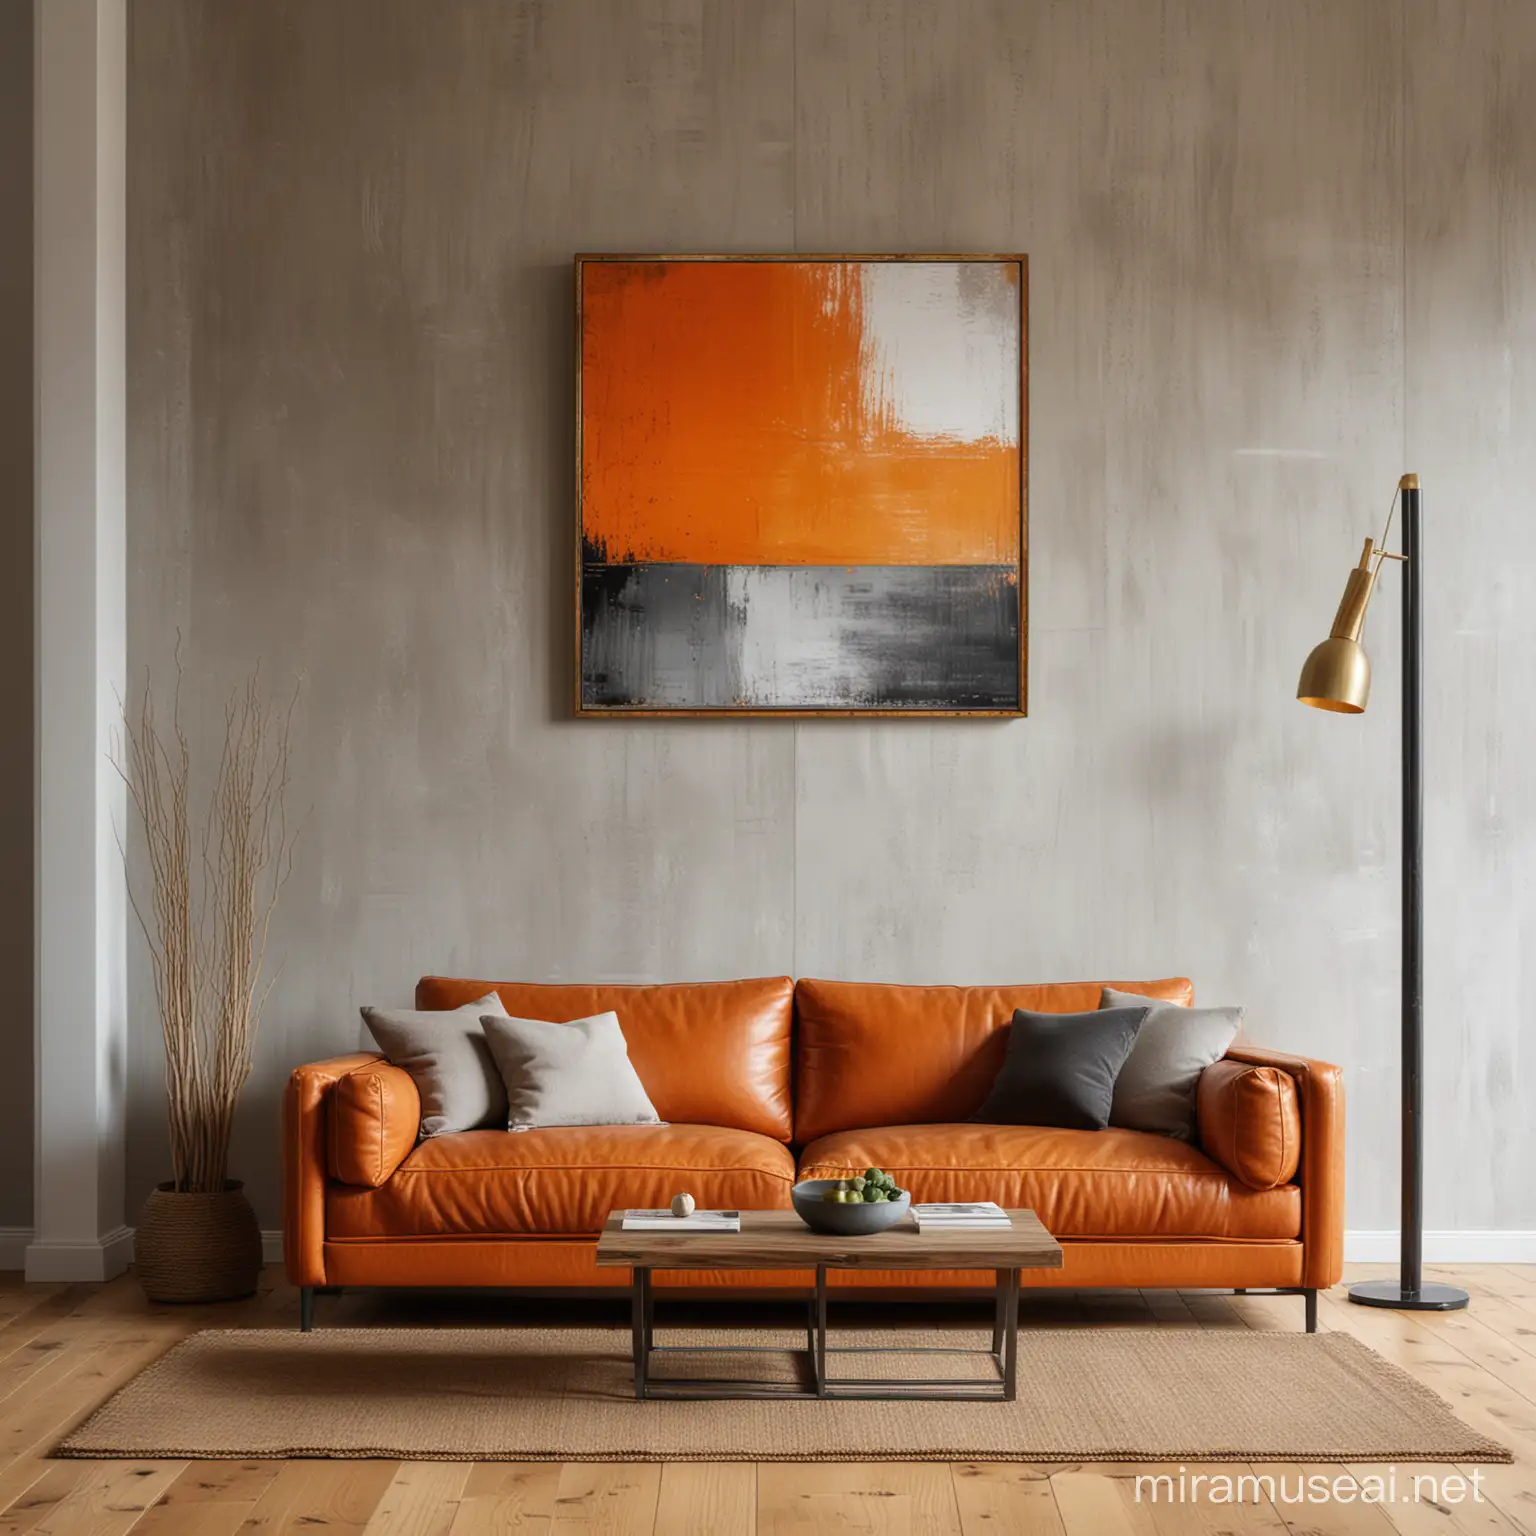 A living room with wooden floor and wooden posts in orange and gray, behind the golden leather sofa hangs a square picture, vivid, detailed, light and shadow